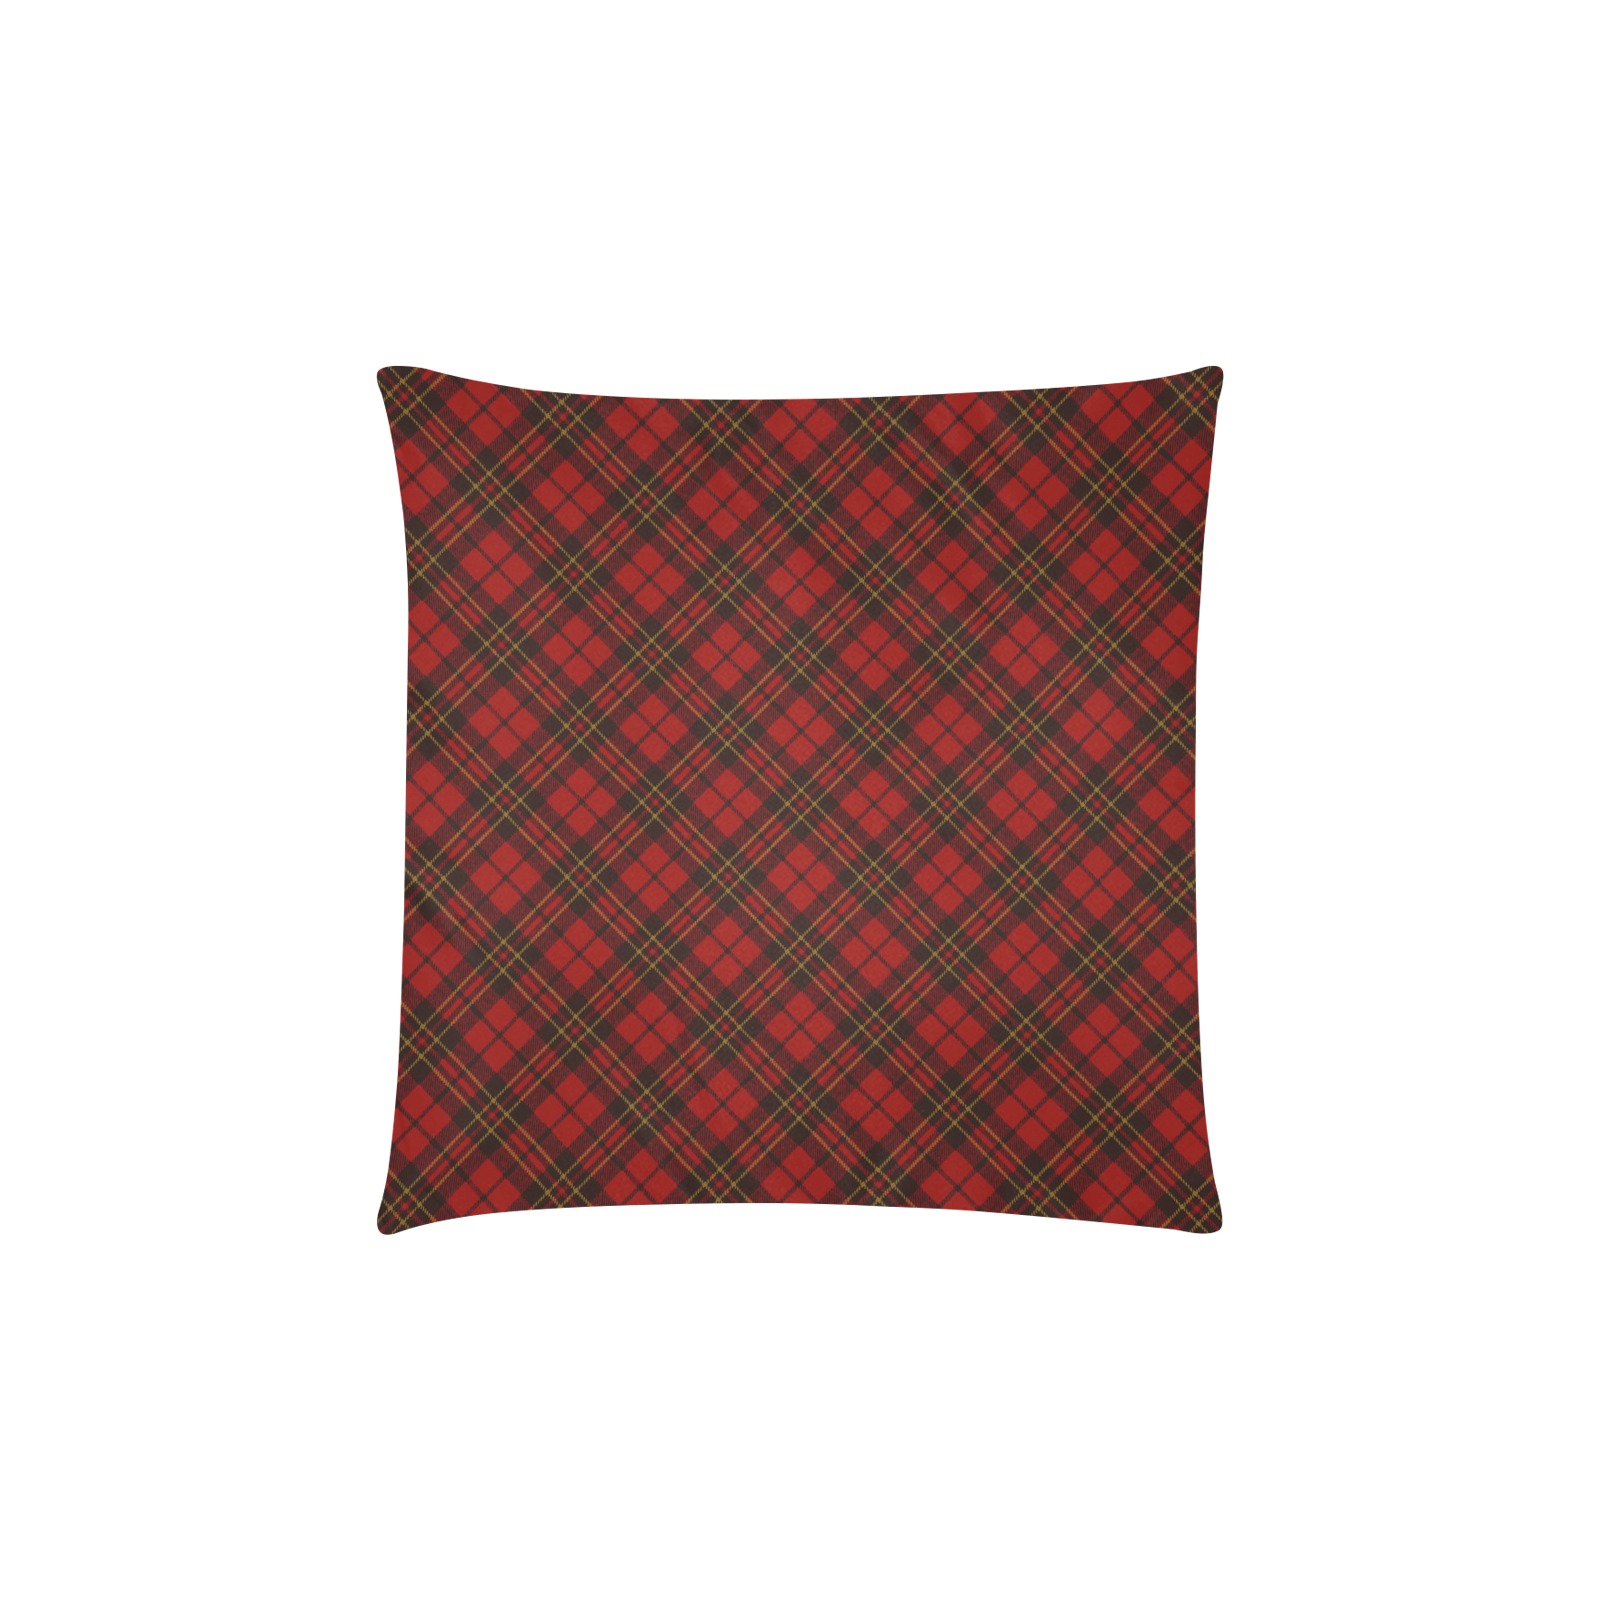 Red tartan plaid winter Christmas pattern holidays Custom Zippered Pillow Cases 16"x16" (Two Sides)